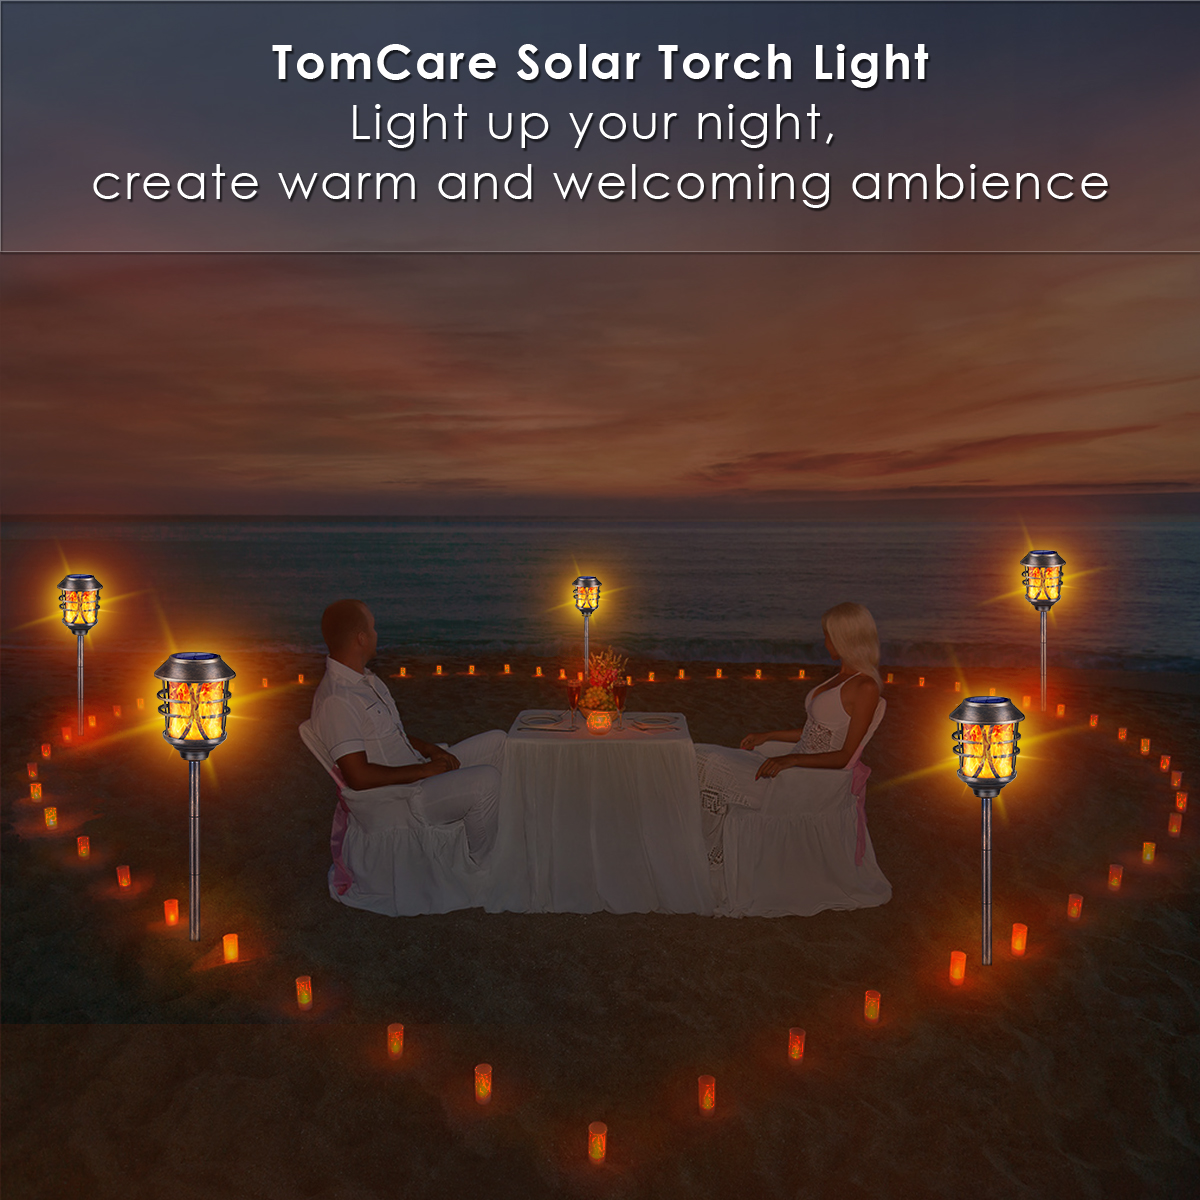 TomCare Solar Lights Metal Solar Torch Lights Flickering Flame Outdoor Lighting Decorative Landscape Pathway Garden Lights Waterproof Solar Powered Dusk to Dawn Auto On/Off for Patio Yard Pool 4 Pack